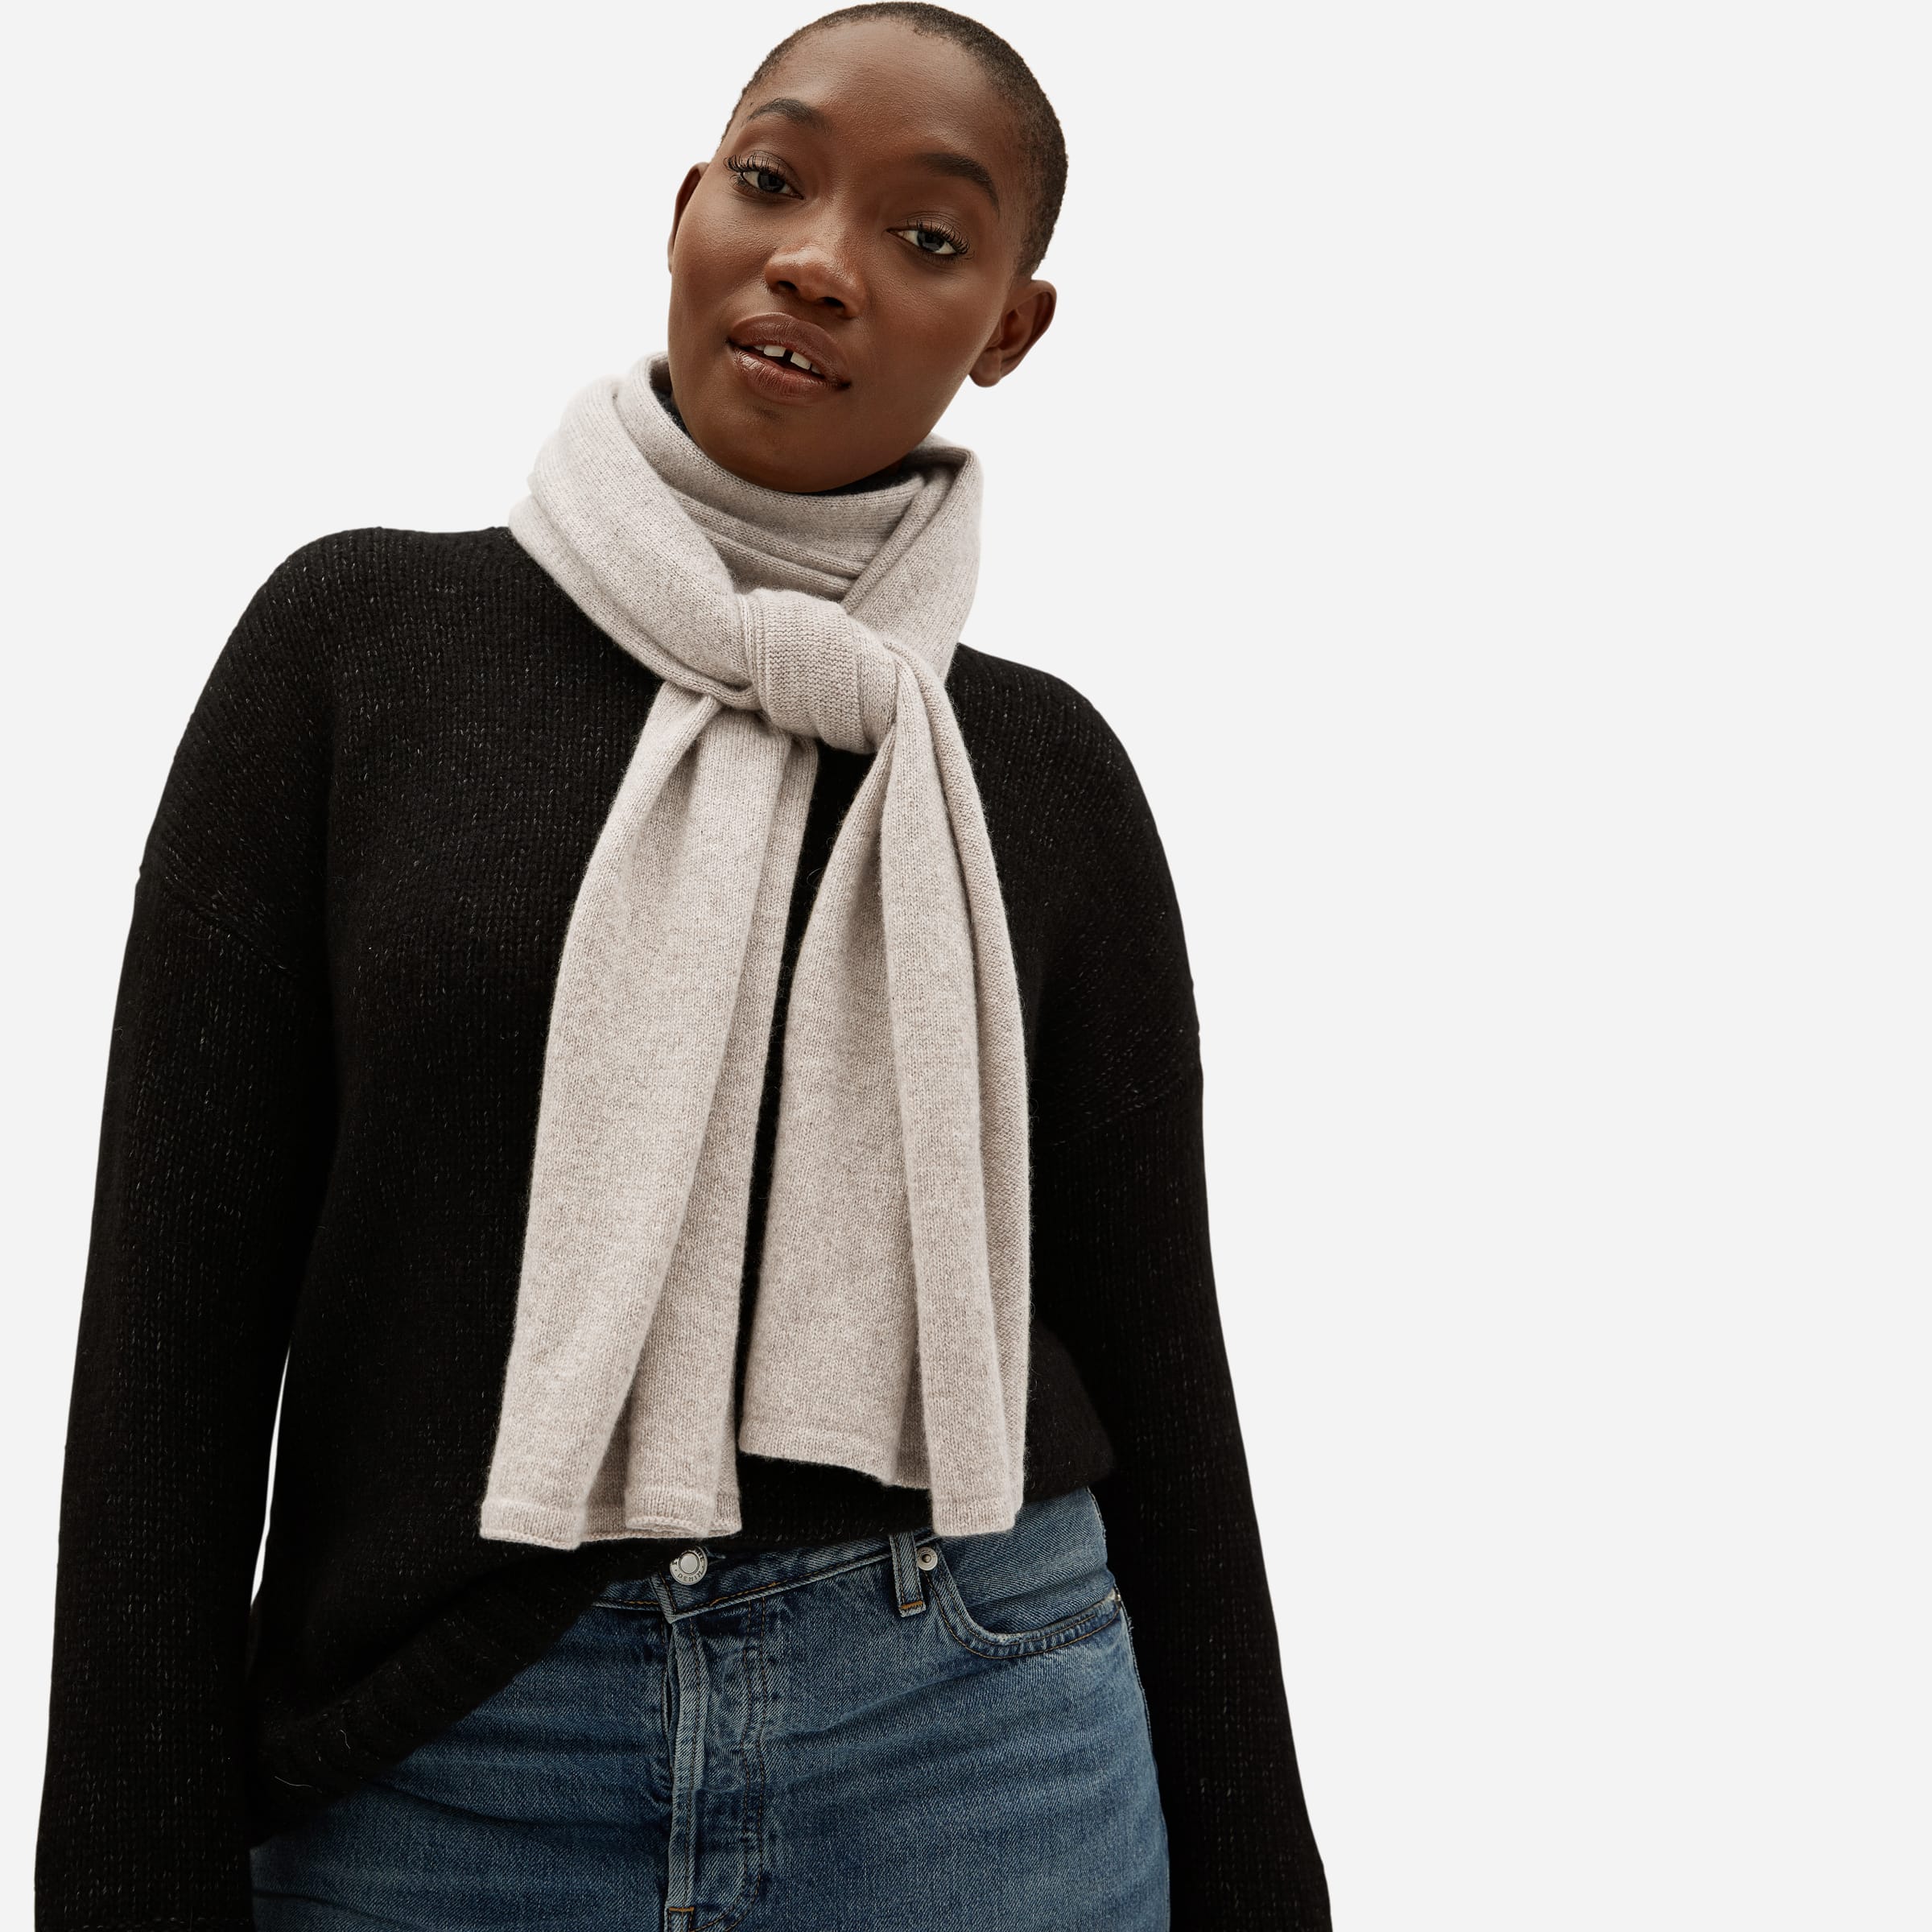 Everlane's firstever Black Friday sale gives back to a good cause